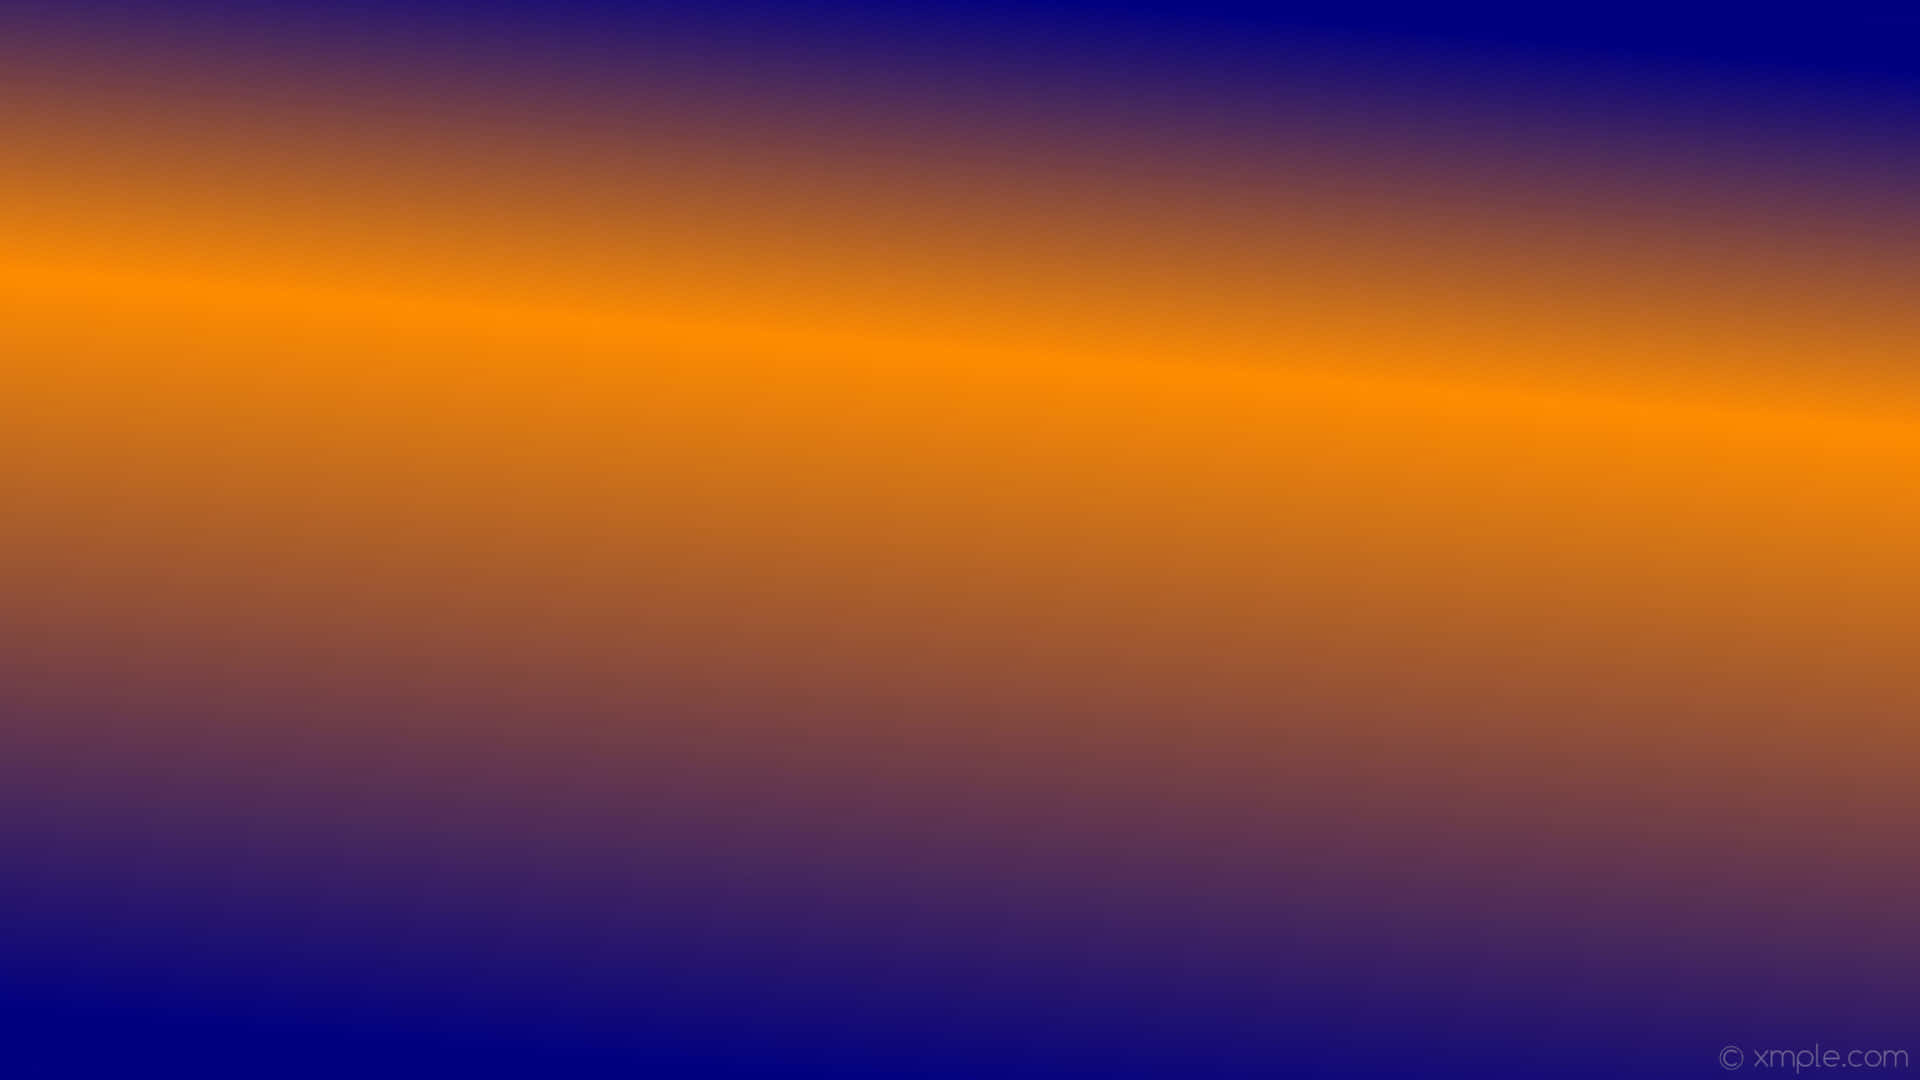 A Blue And Orange Abstract Background